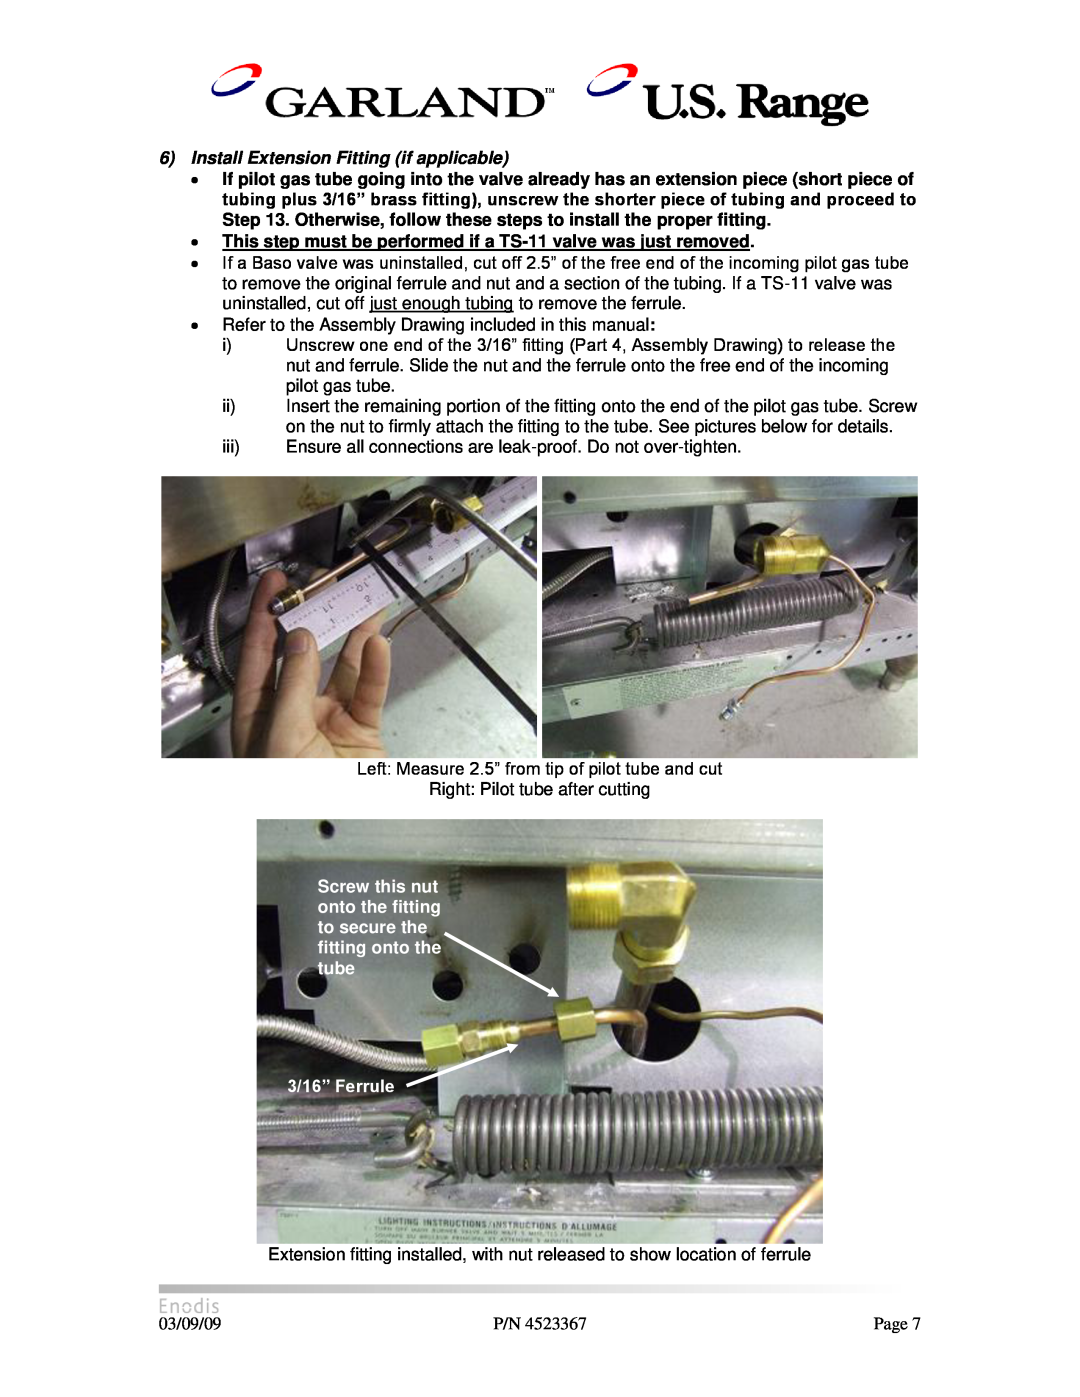 Garland H280 manual Install Extension Fitting if applicable, Otherwise, follow these steps to install the proper fitting 